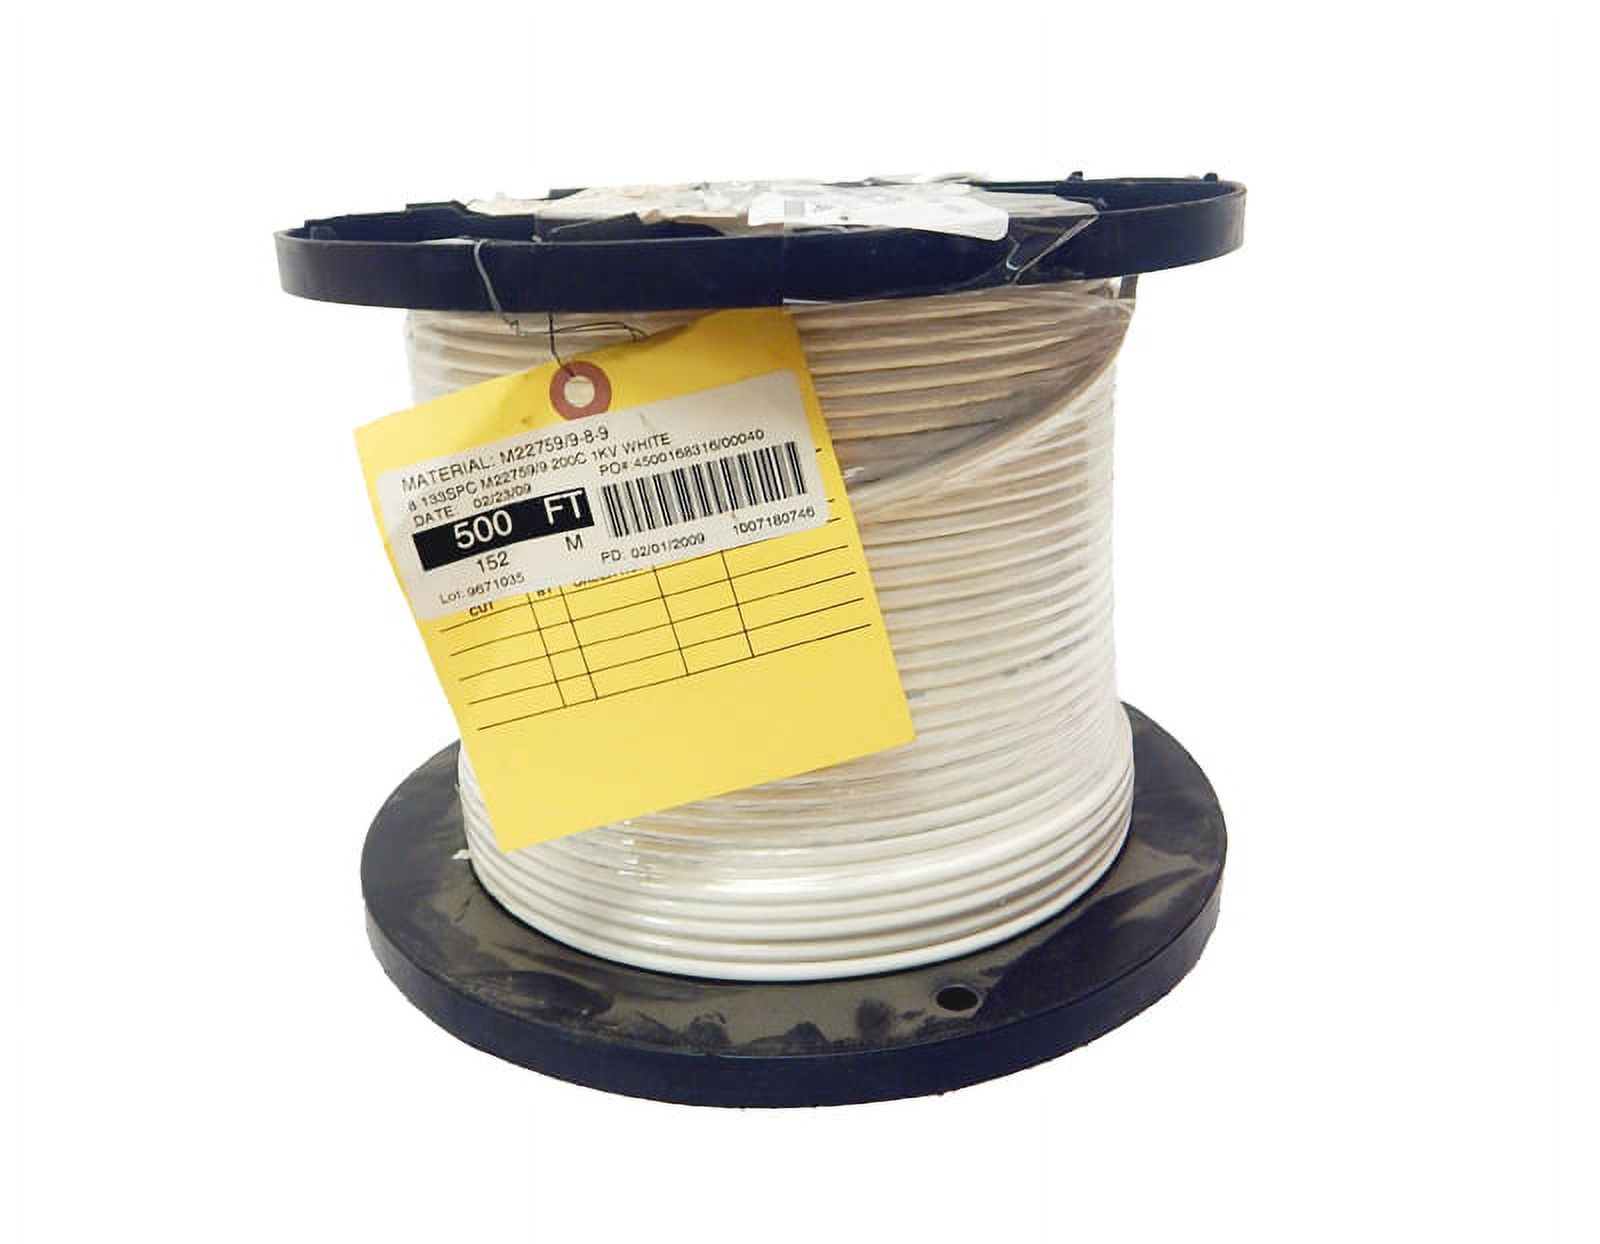 Thermax MIL-W-22759-9 500FT Elect Wire 8-AXT-13329-500 - image 1 of 1